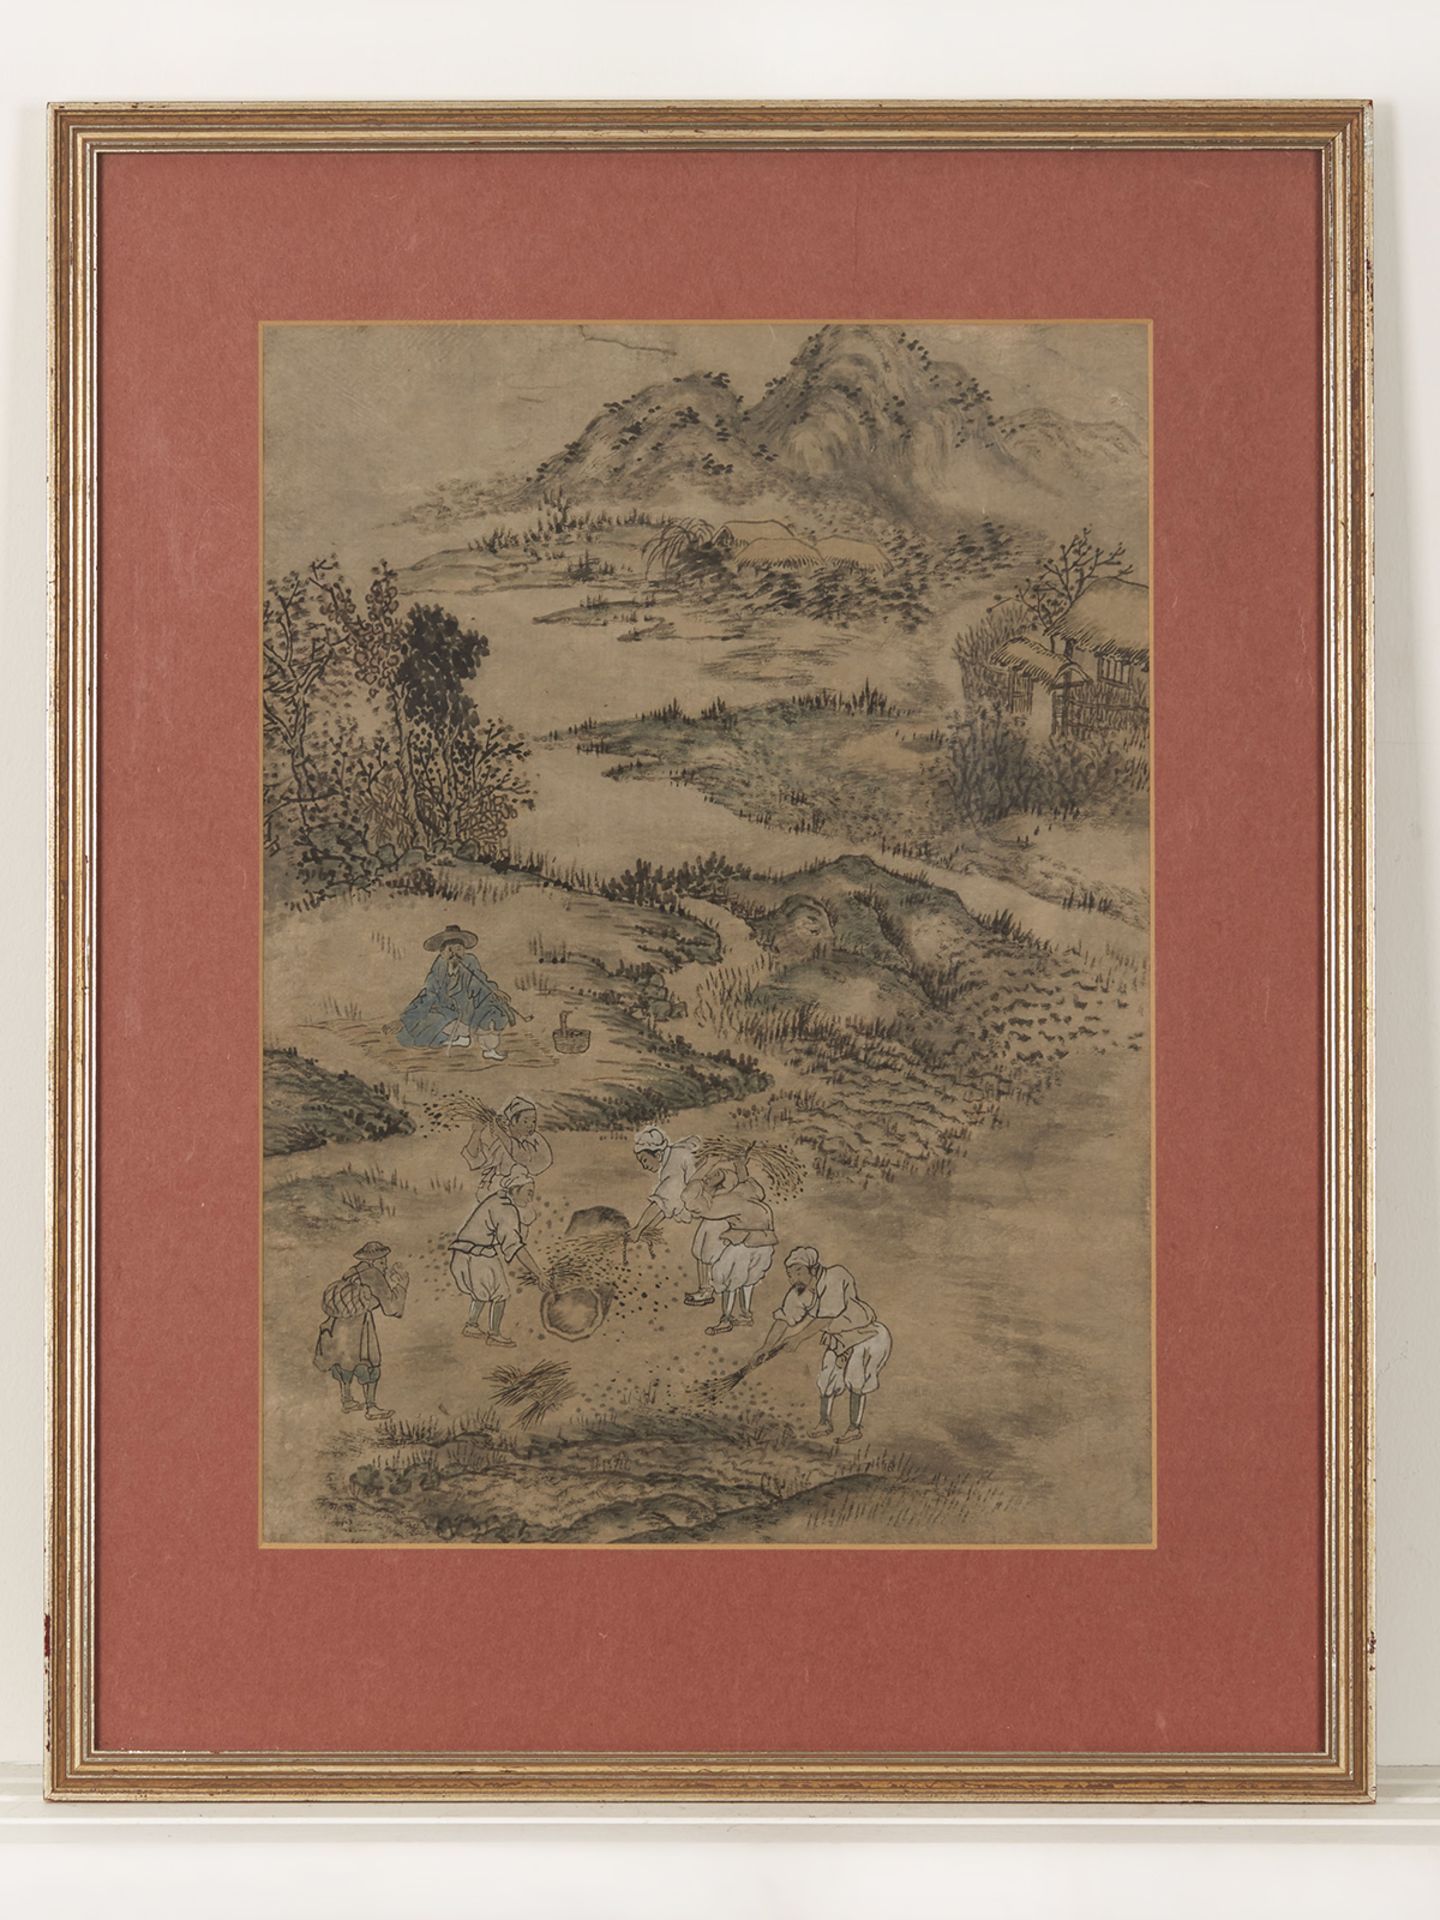 ANTIQUE CHINESE FARMING LANDSCAPE, INK ON PAPER, 19TH C.